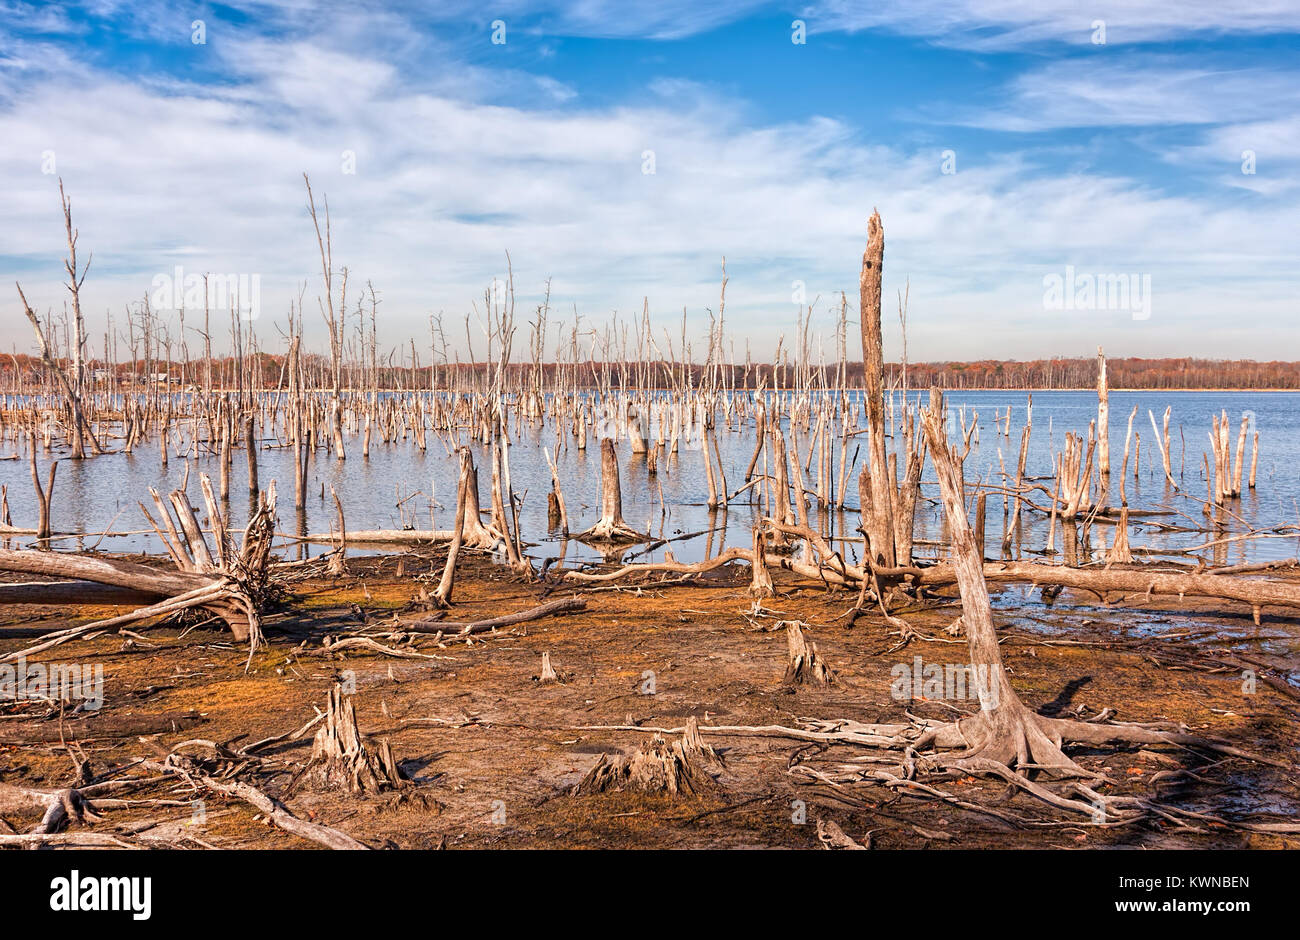 A lake and dead, fallen trees. Land that was once covered by water from the lake is now exposed. Stock Photo